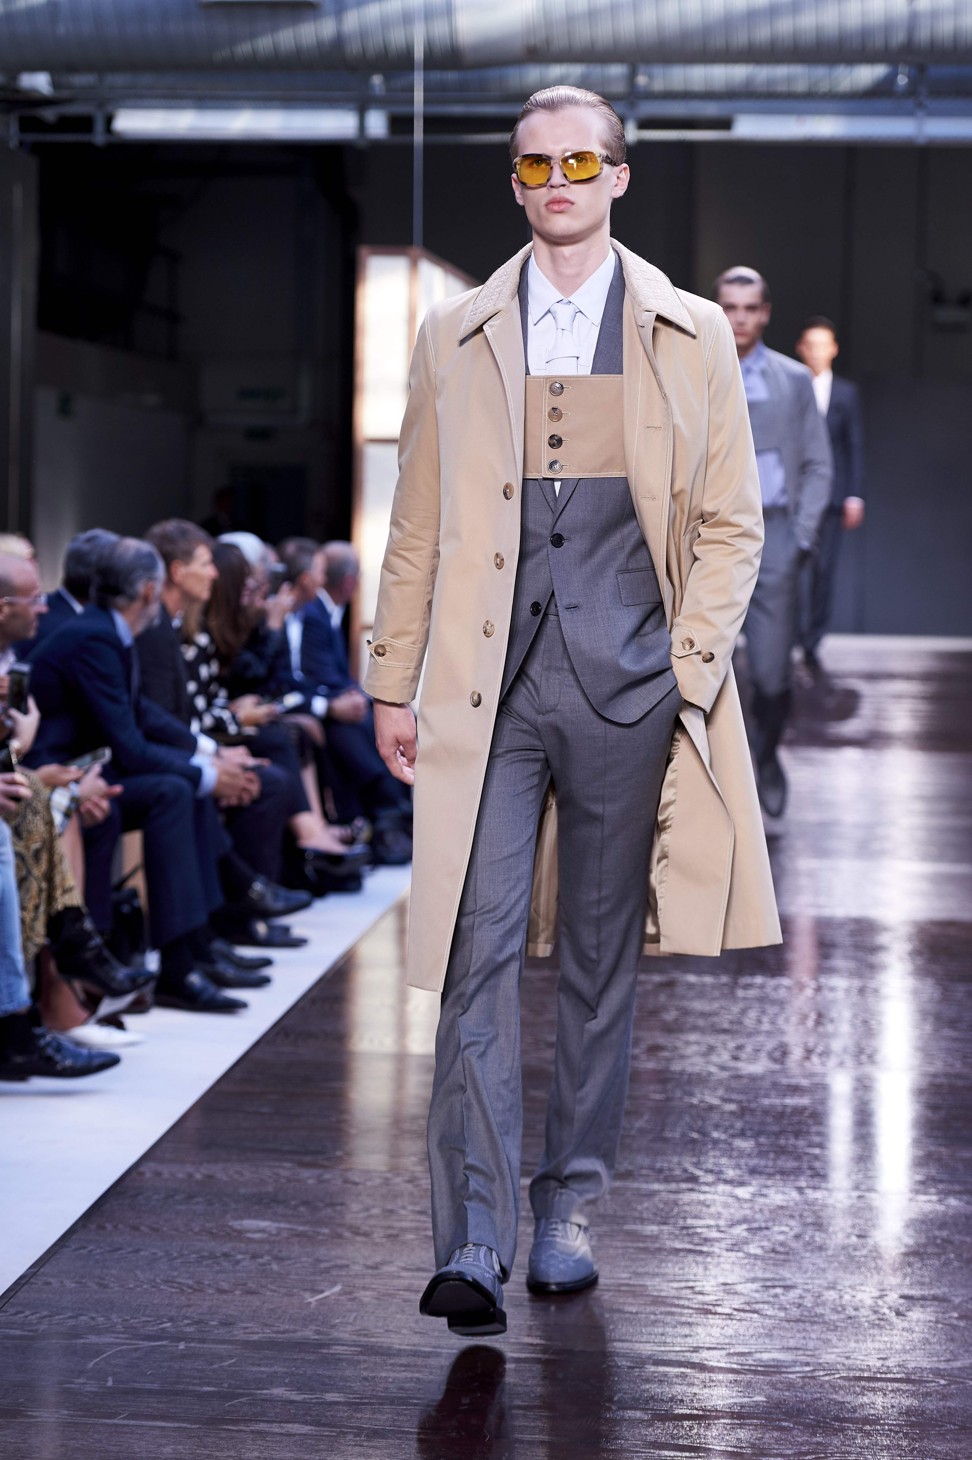 Burberry’s trademark trench coats took centre stage at new designer Riccardo Tisci’s spring-summer collection show at London Fashion Week on Monday. Photo: AFP